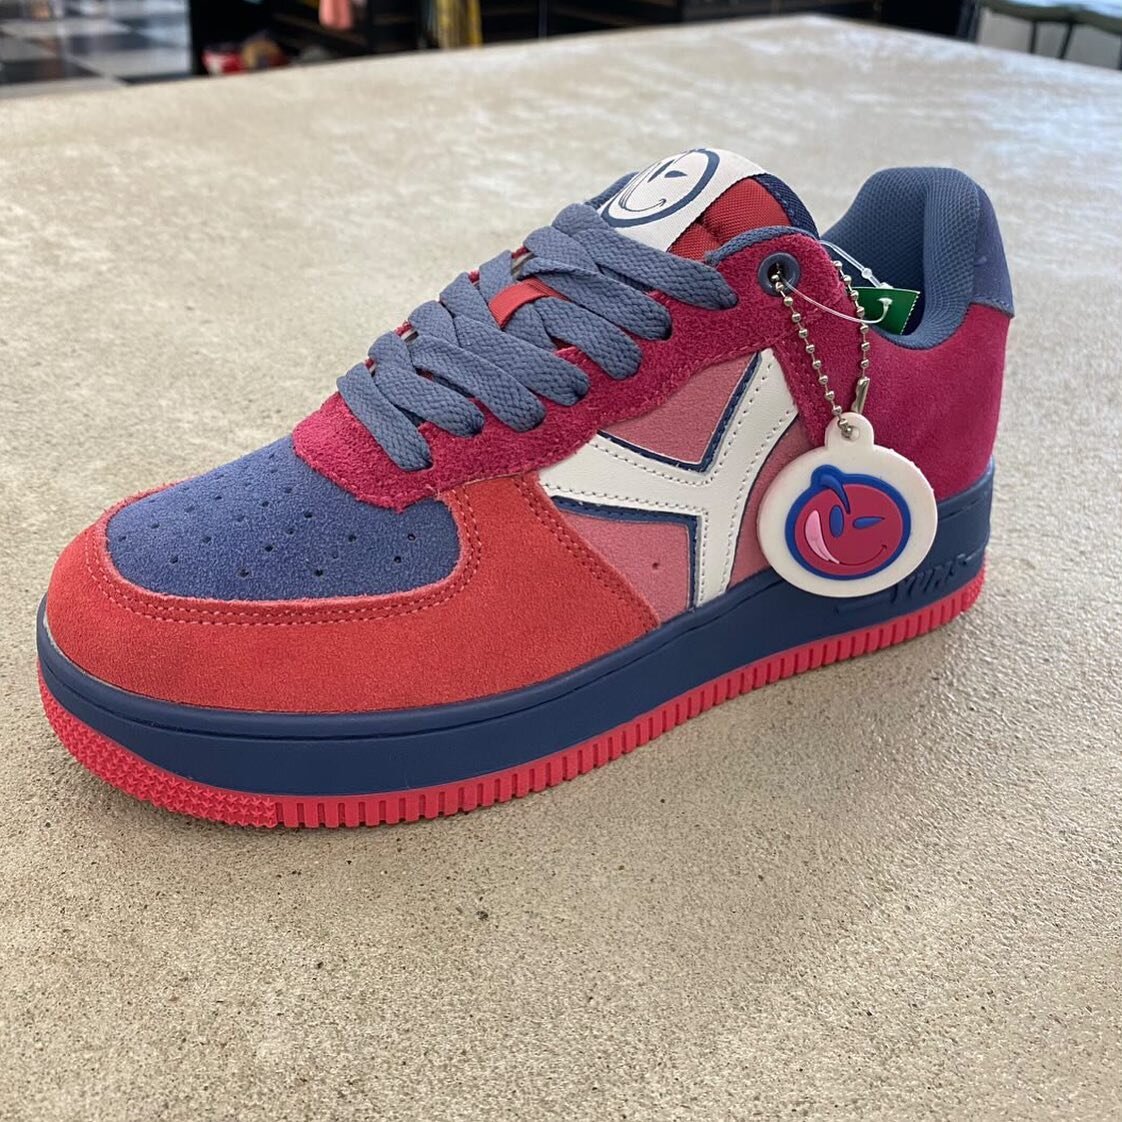 Brand new Yums brand sneakers just in at PX Alcoa!
Women&rsquo;s size 6 &bull; $100 each
.
.
.
#newitemsdaily #alcoatn #maryvilletn #buyselltrade #planetxchange